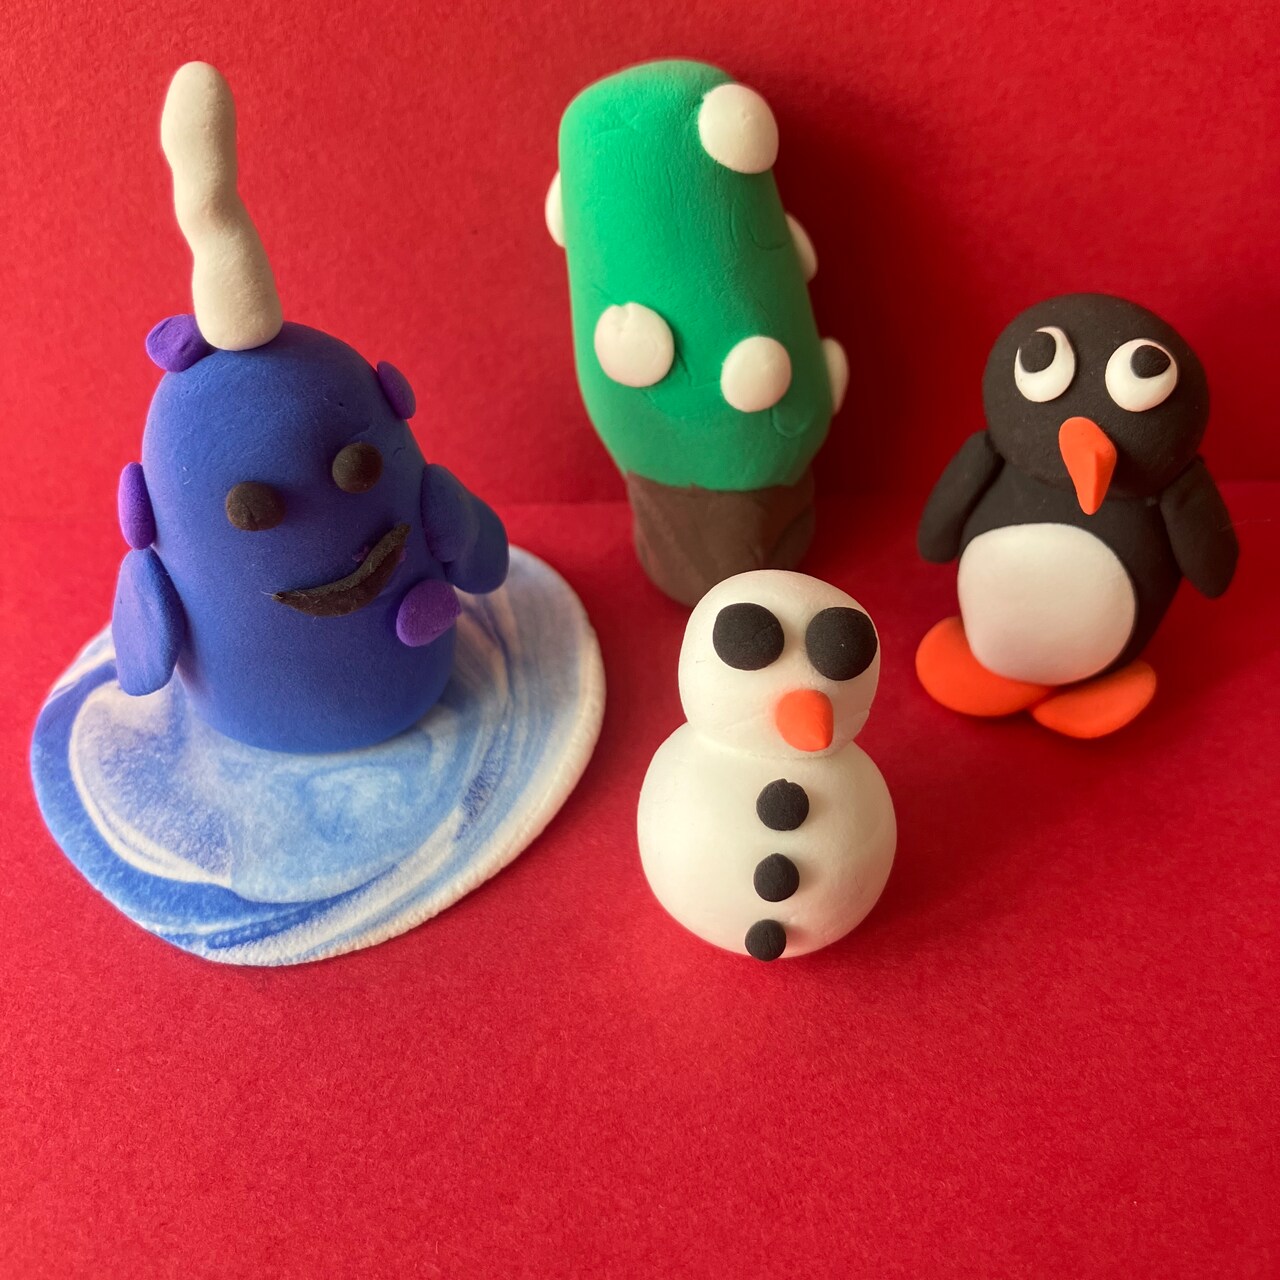 Kids Club: Making Winter Friends with Clay with Elizabeth Barrick